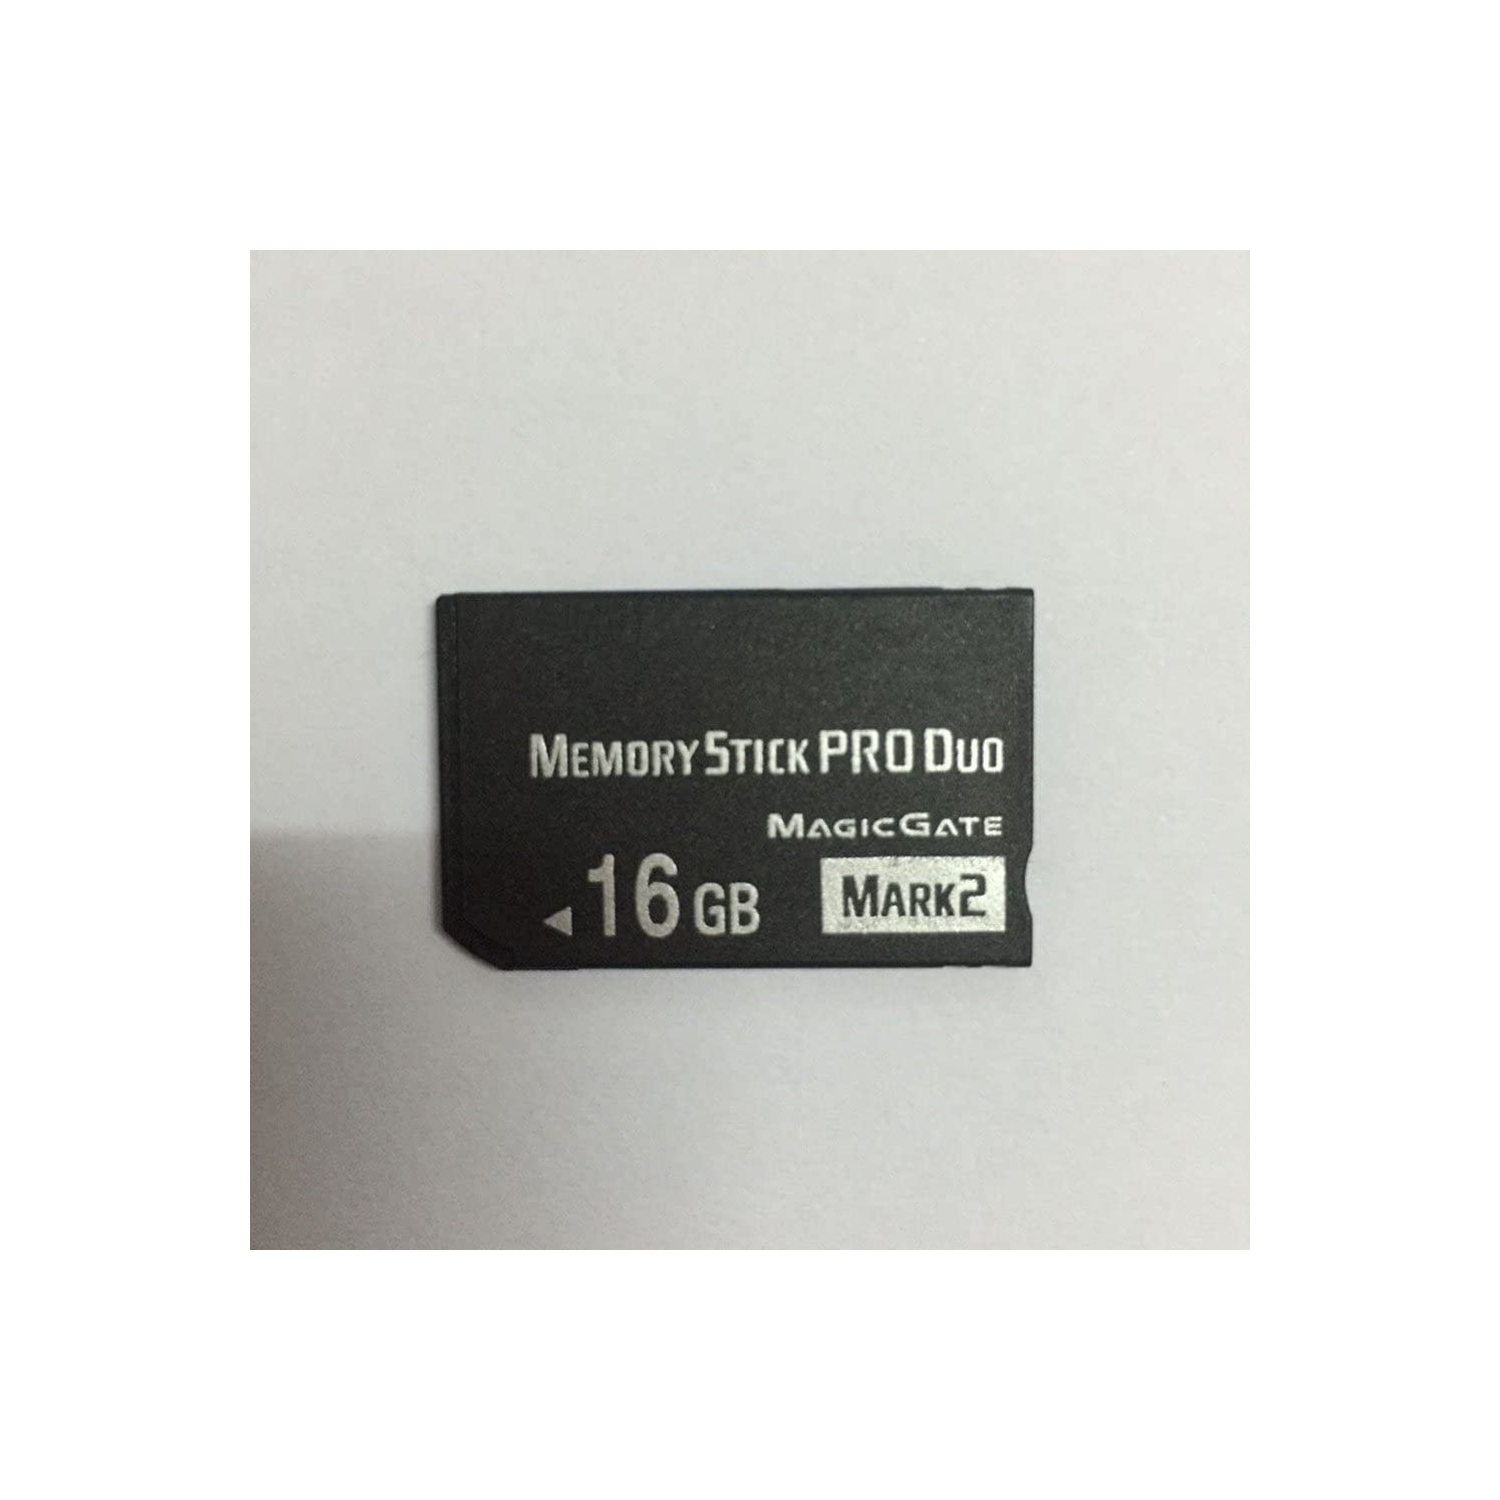 16GB Memory Stick Pro HG Duo card for Sony PSP memory card